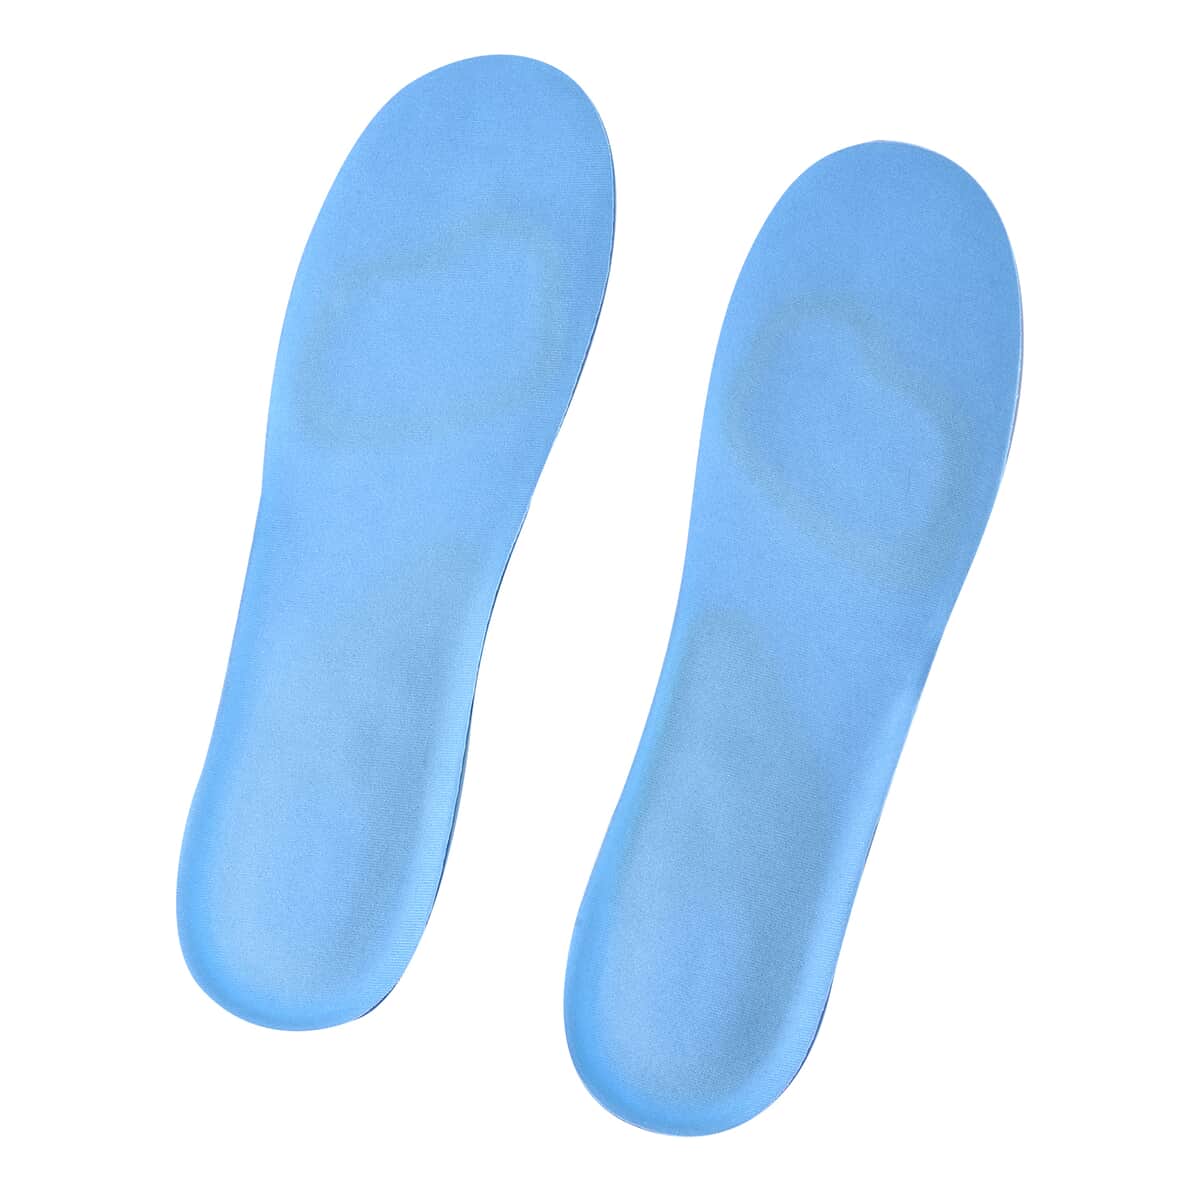 Anti Fatigue Athletic Running Work Shoe Gel Insoles for Men's - Blue & Yellow, Fits Mens Shoe Sizes 9 to 13 image number 1